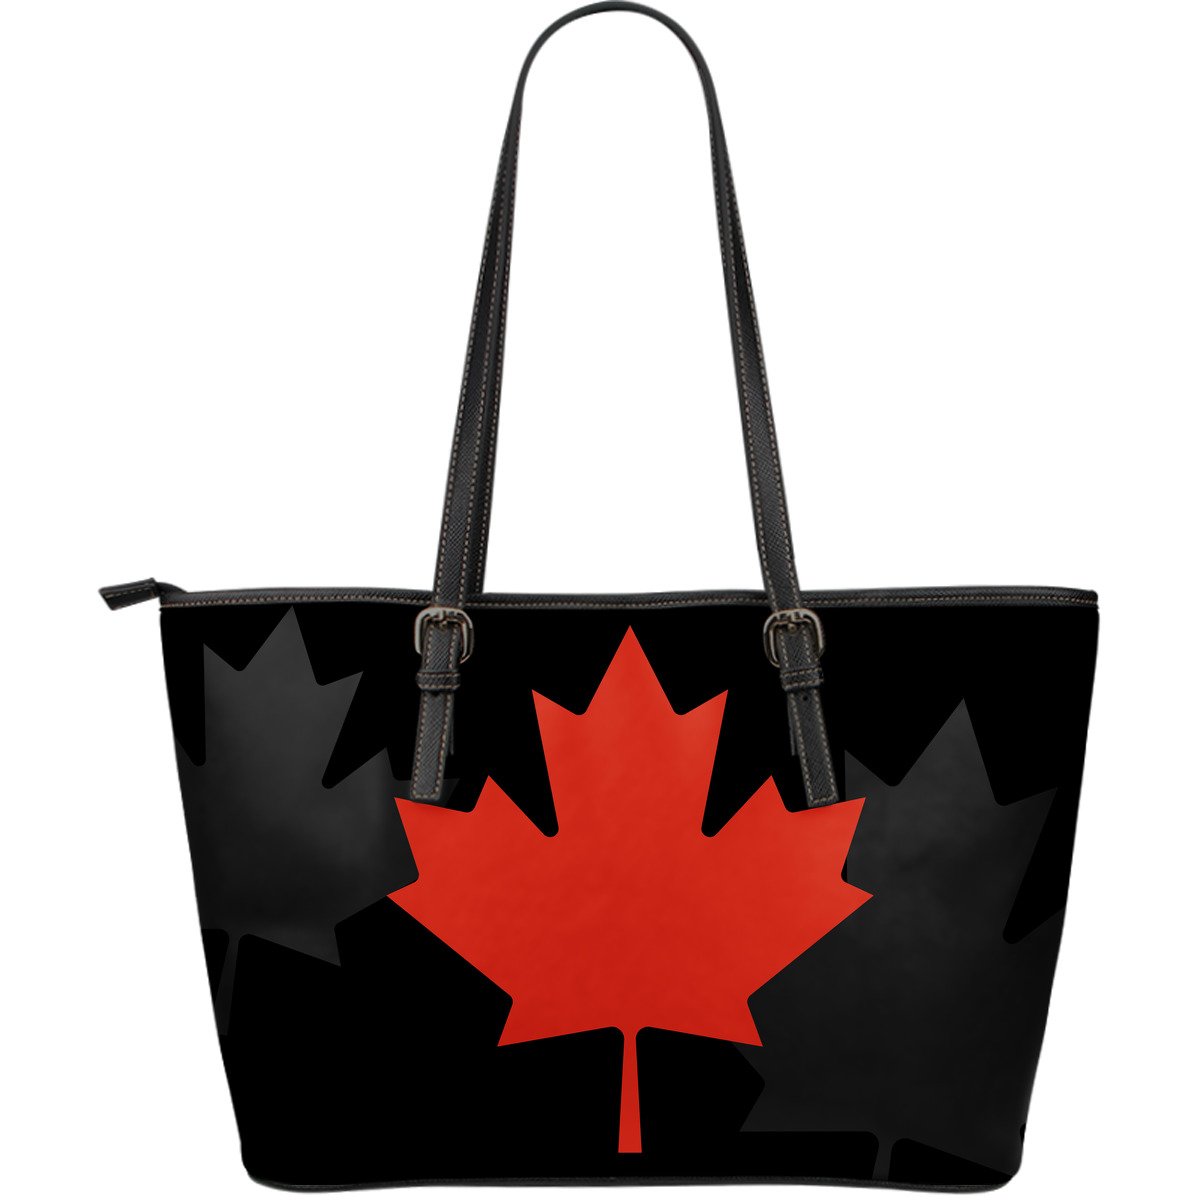 canada-leather-tote-bag-large-size